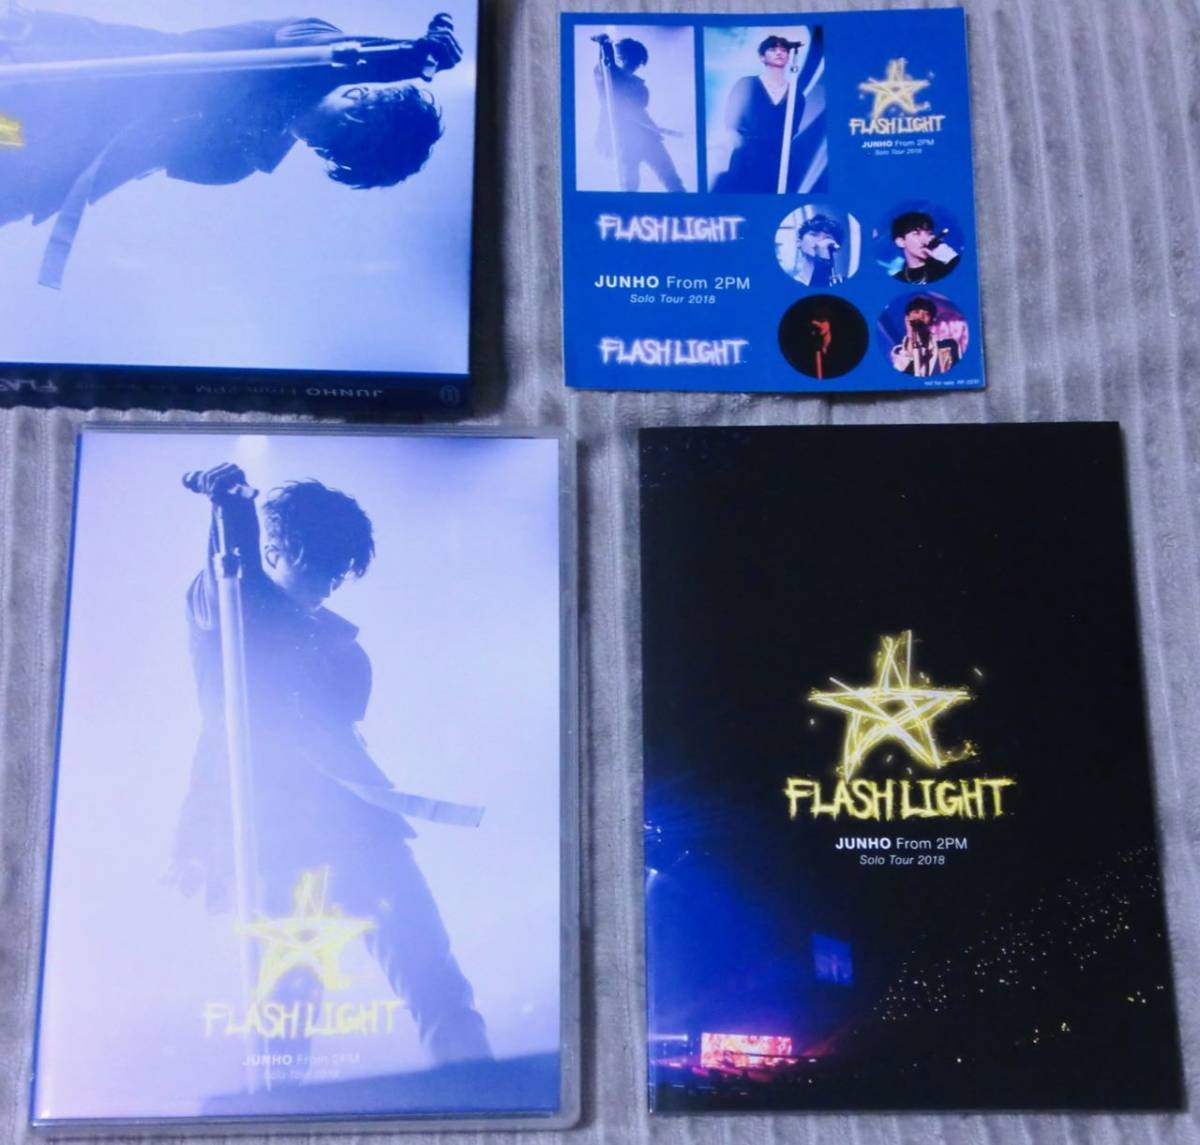 ◆【Blu-ray+DVD】 JUNHO (From 2PM) Solo Tour 2018 ''FLASHLIGHT'' 完全生産限定盤 ジュノ/ブルーレイ_画像3